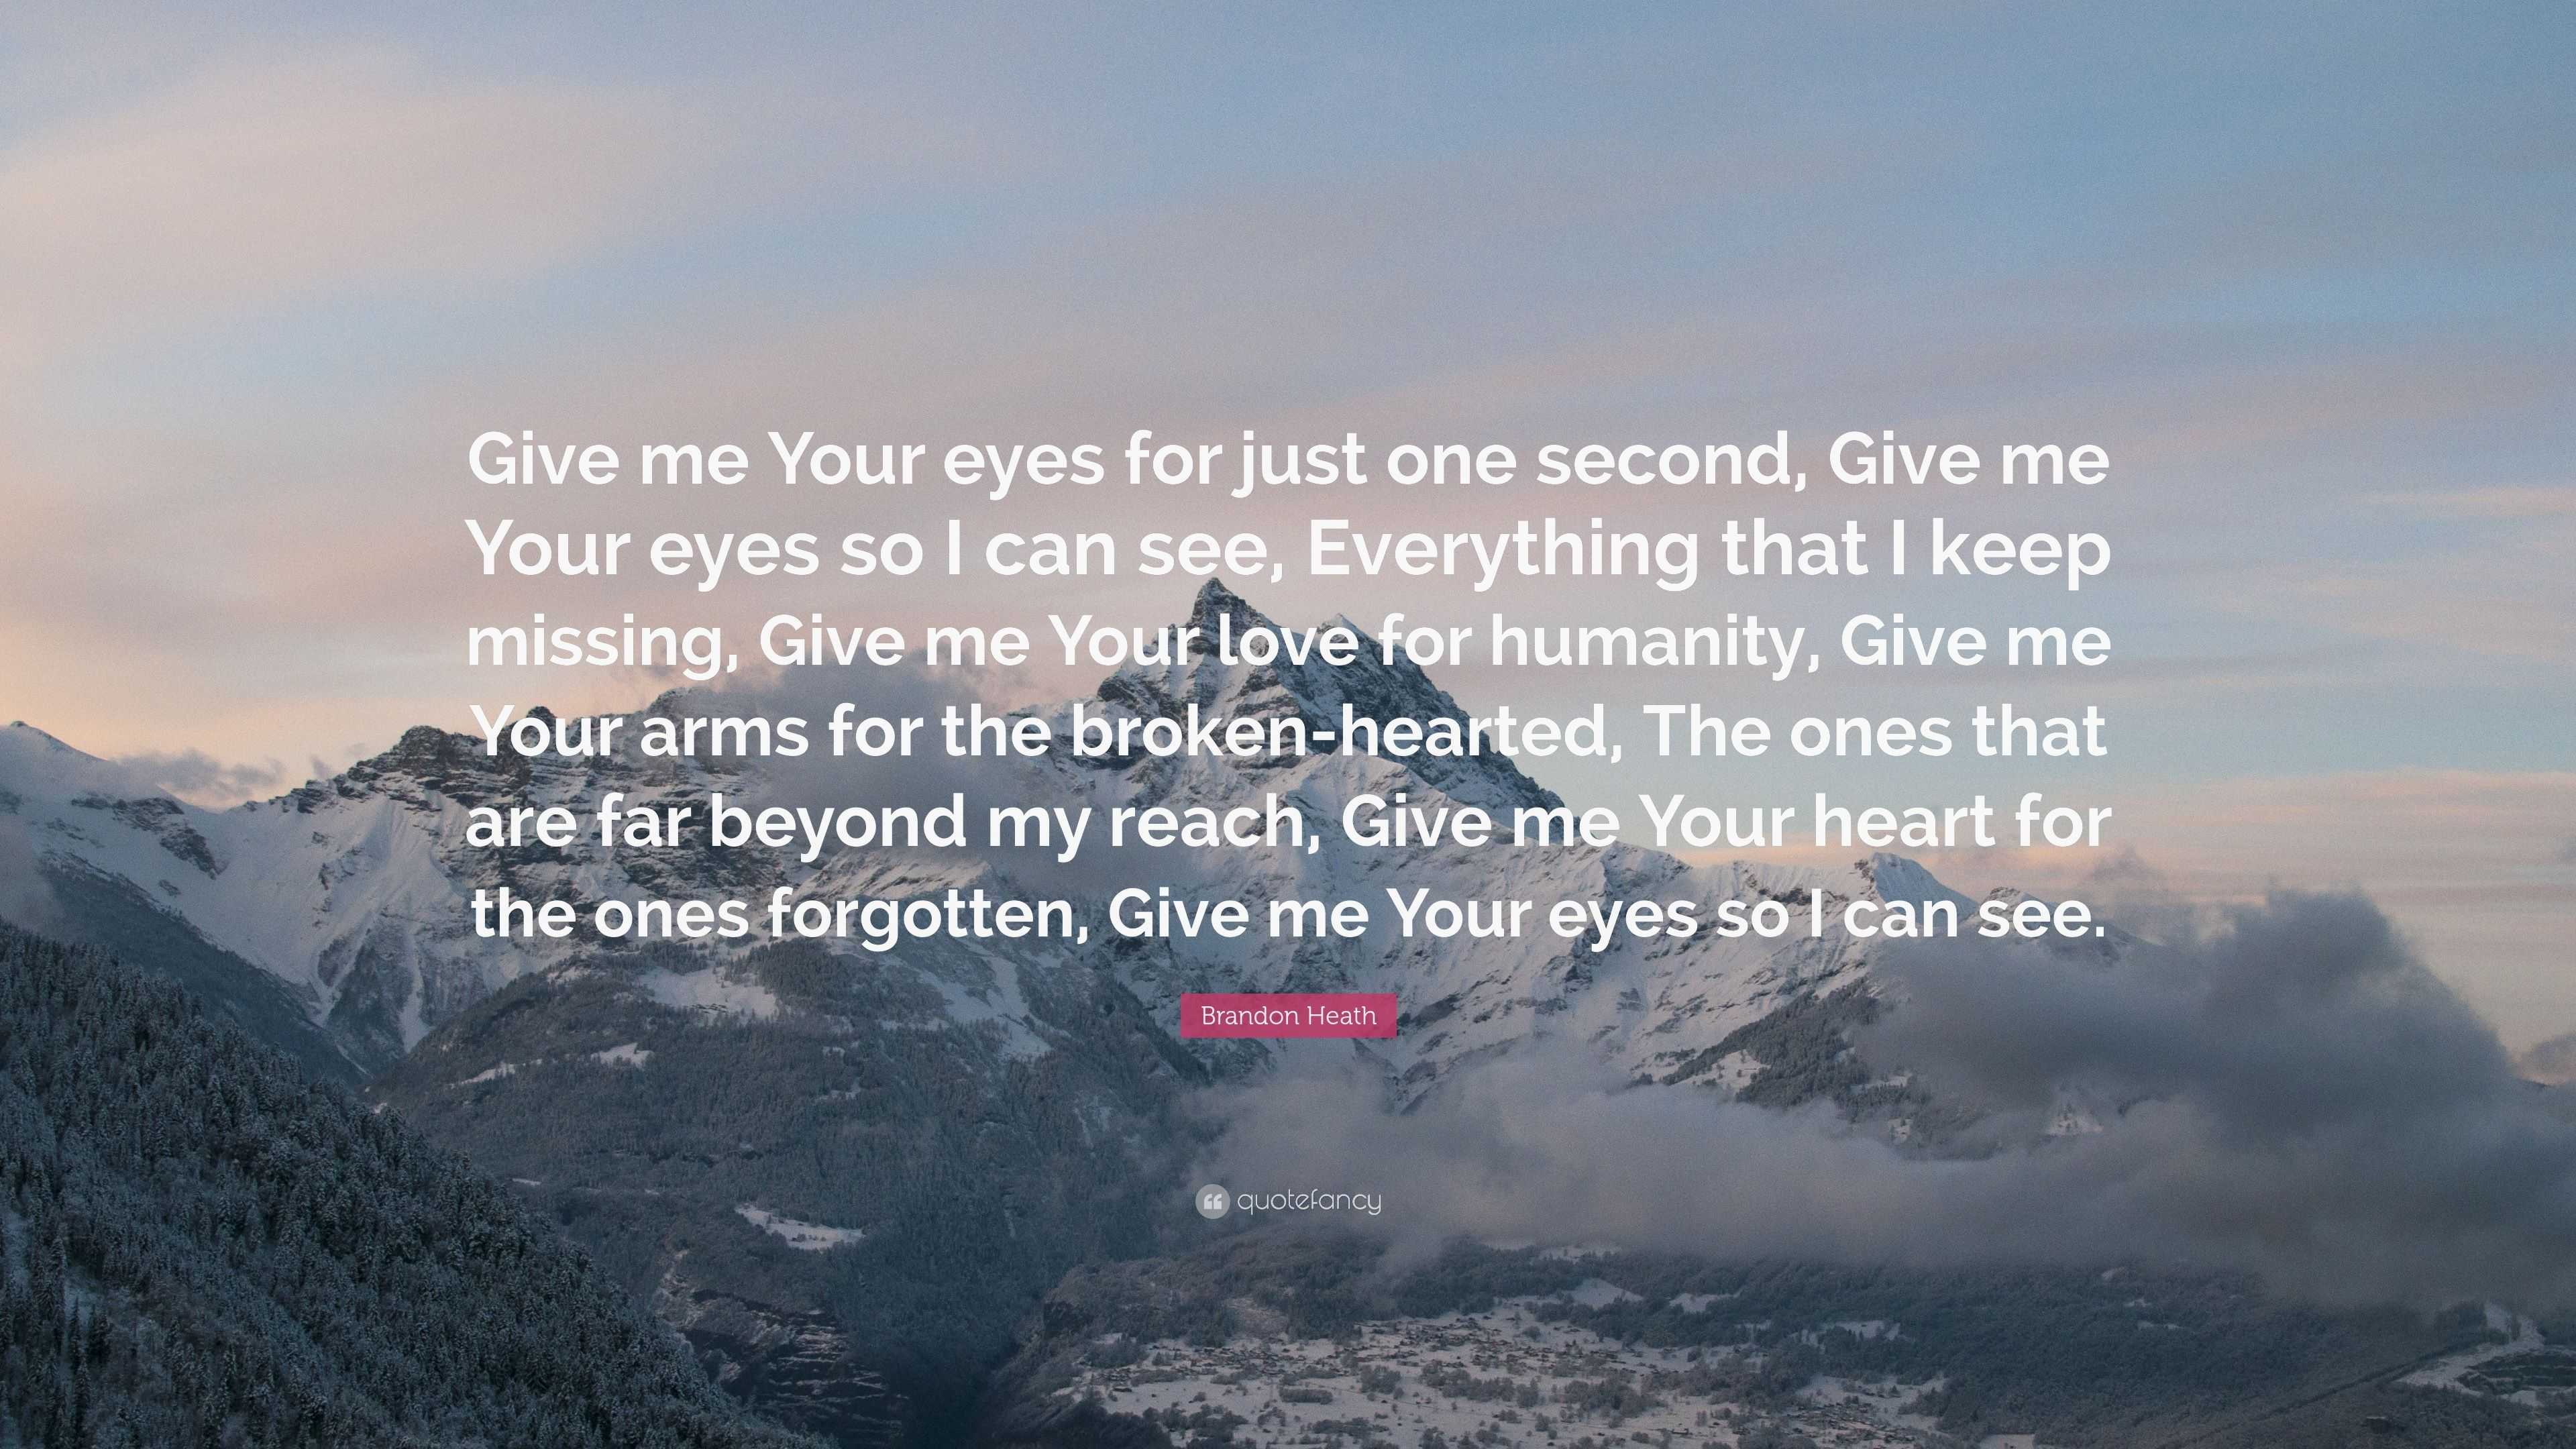 Brandon Heath Quote: “Give me Your eyes for just one second, Give me ...